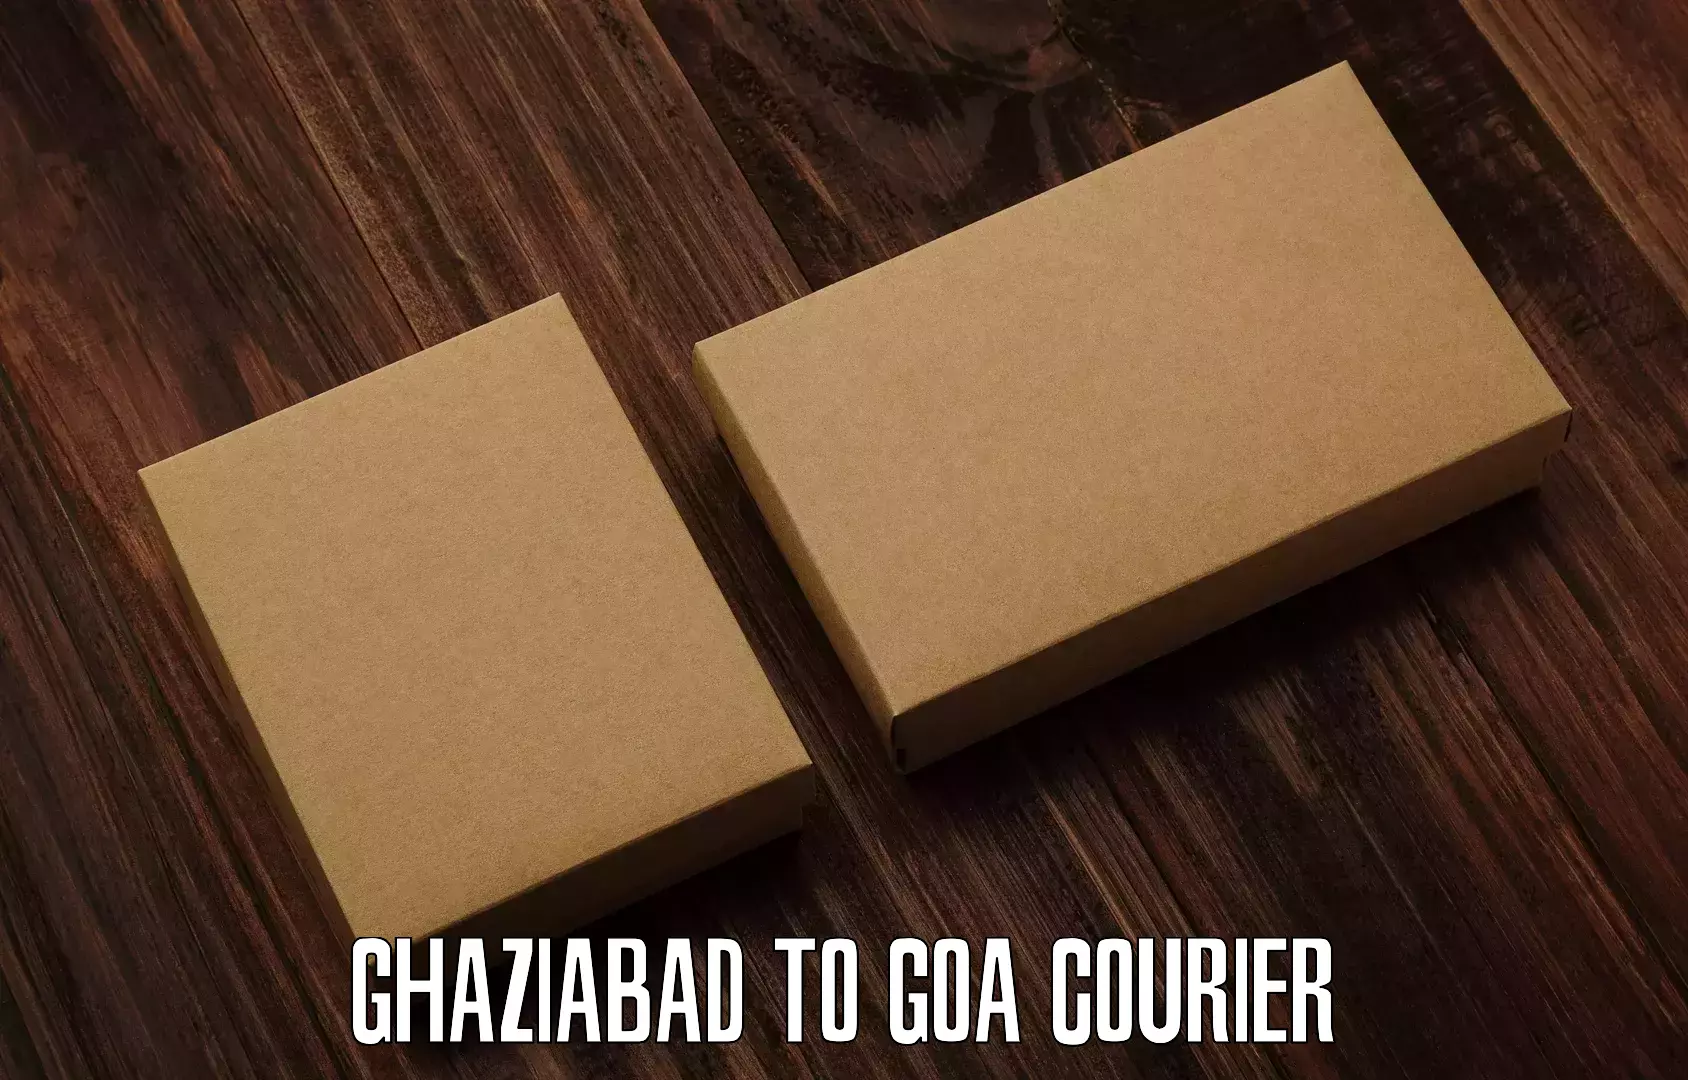 High-speed parcel service Ghaziabad to Bardez